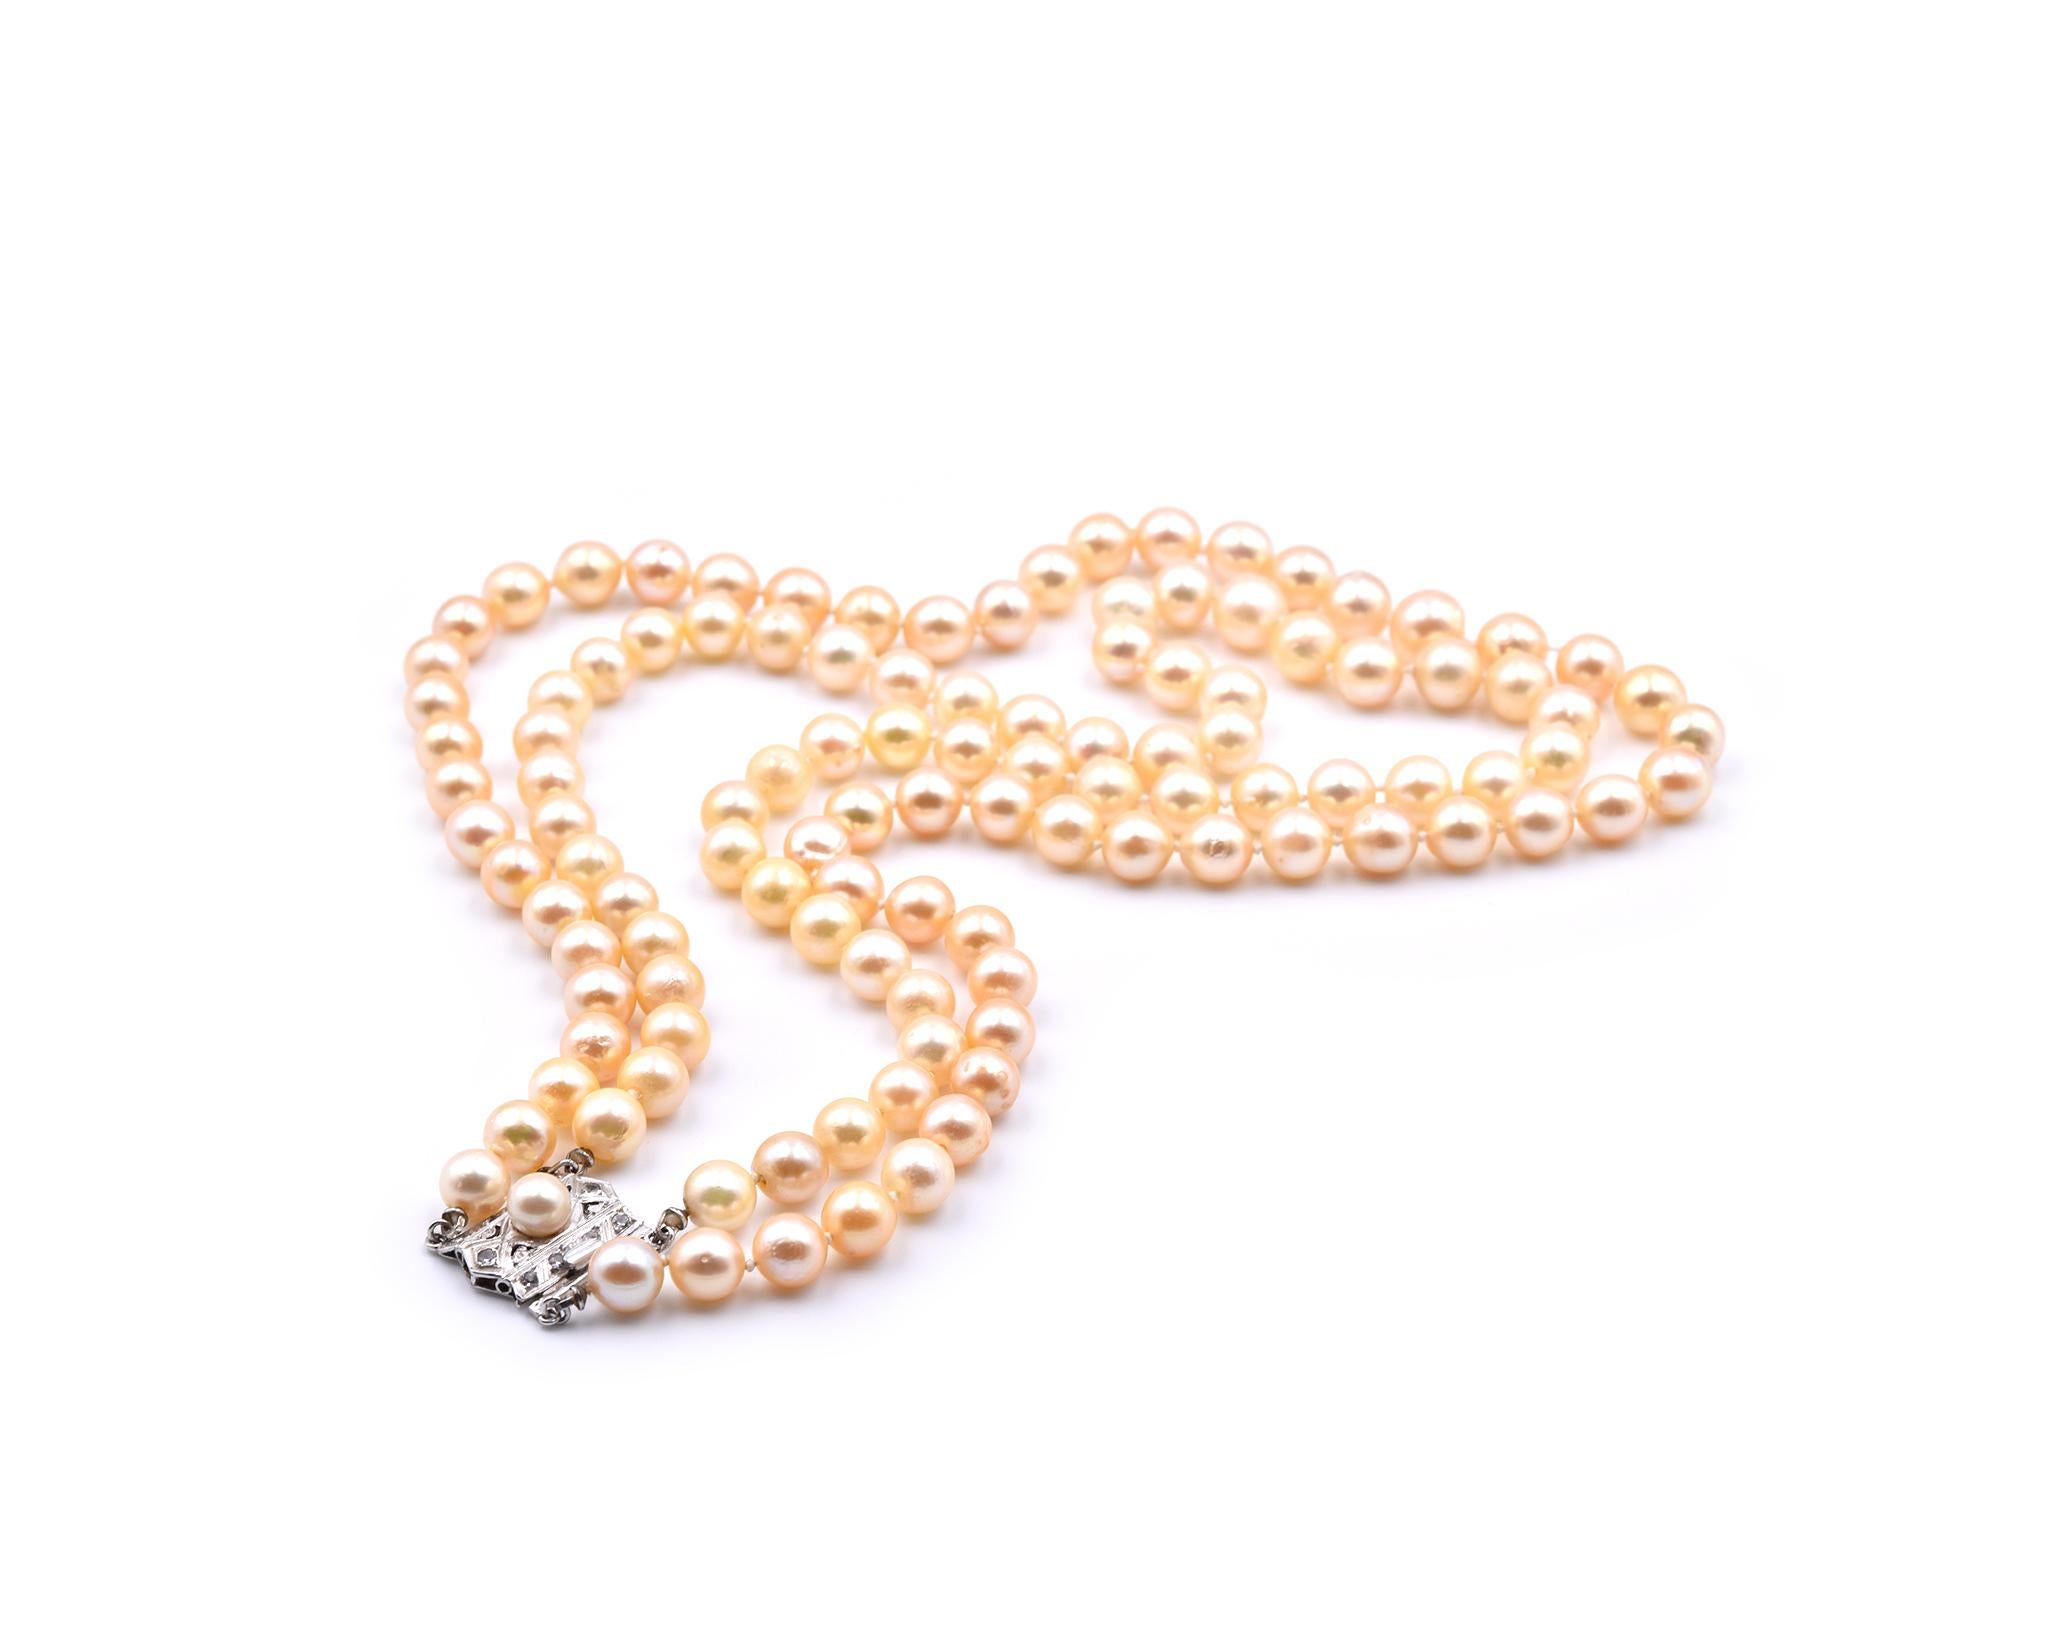 Designer: custom design 
Material: platinum
White Sapphires: 10 round cut=.30cttw
Pearls: 7.5mm
Dimensions: necklace is 19-inches long 
Weight: 89.21 grams
